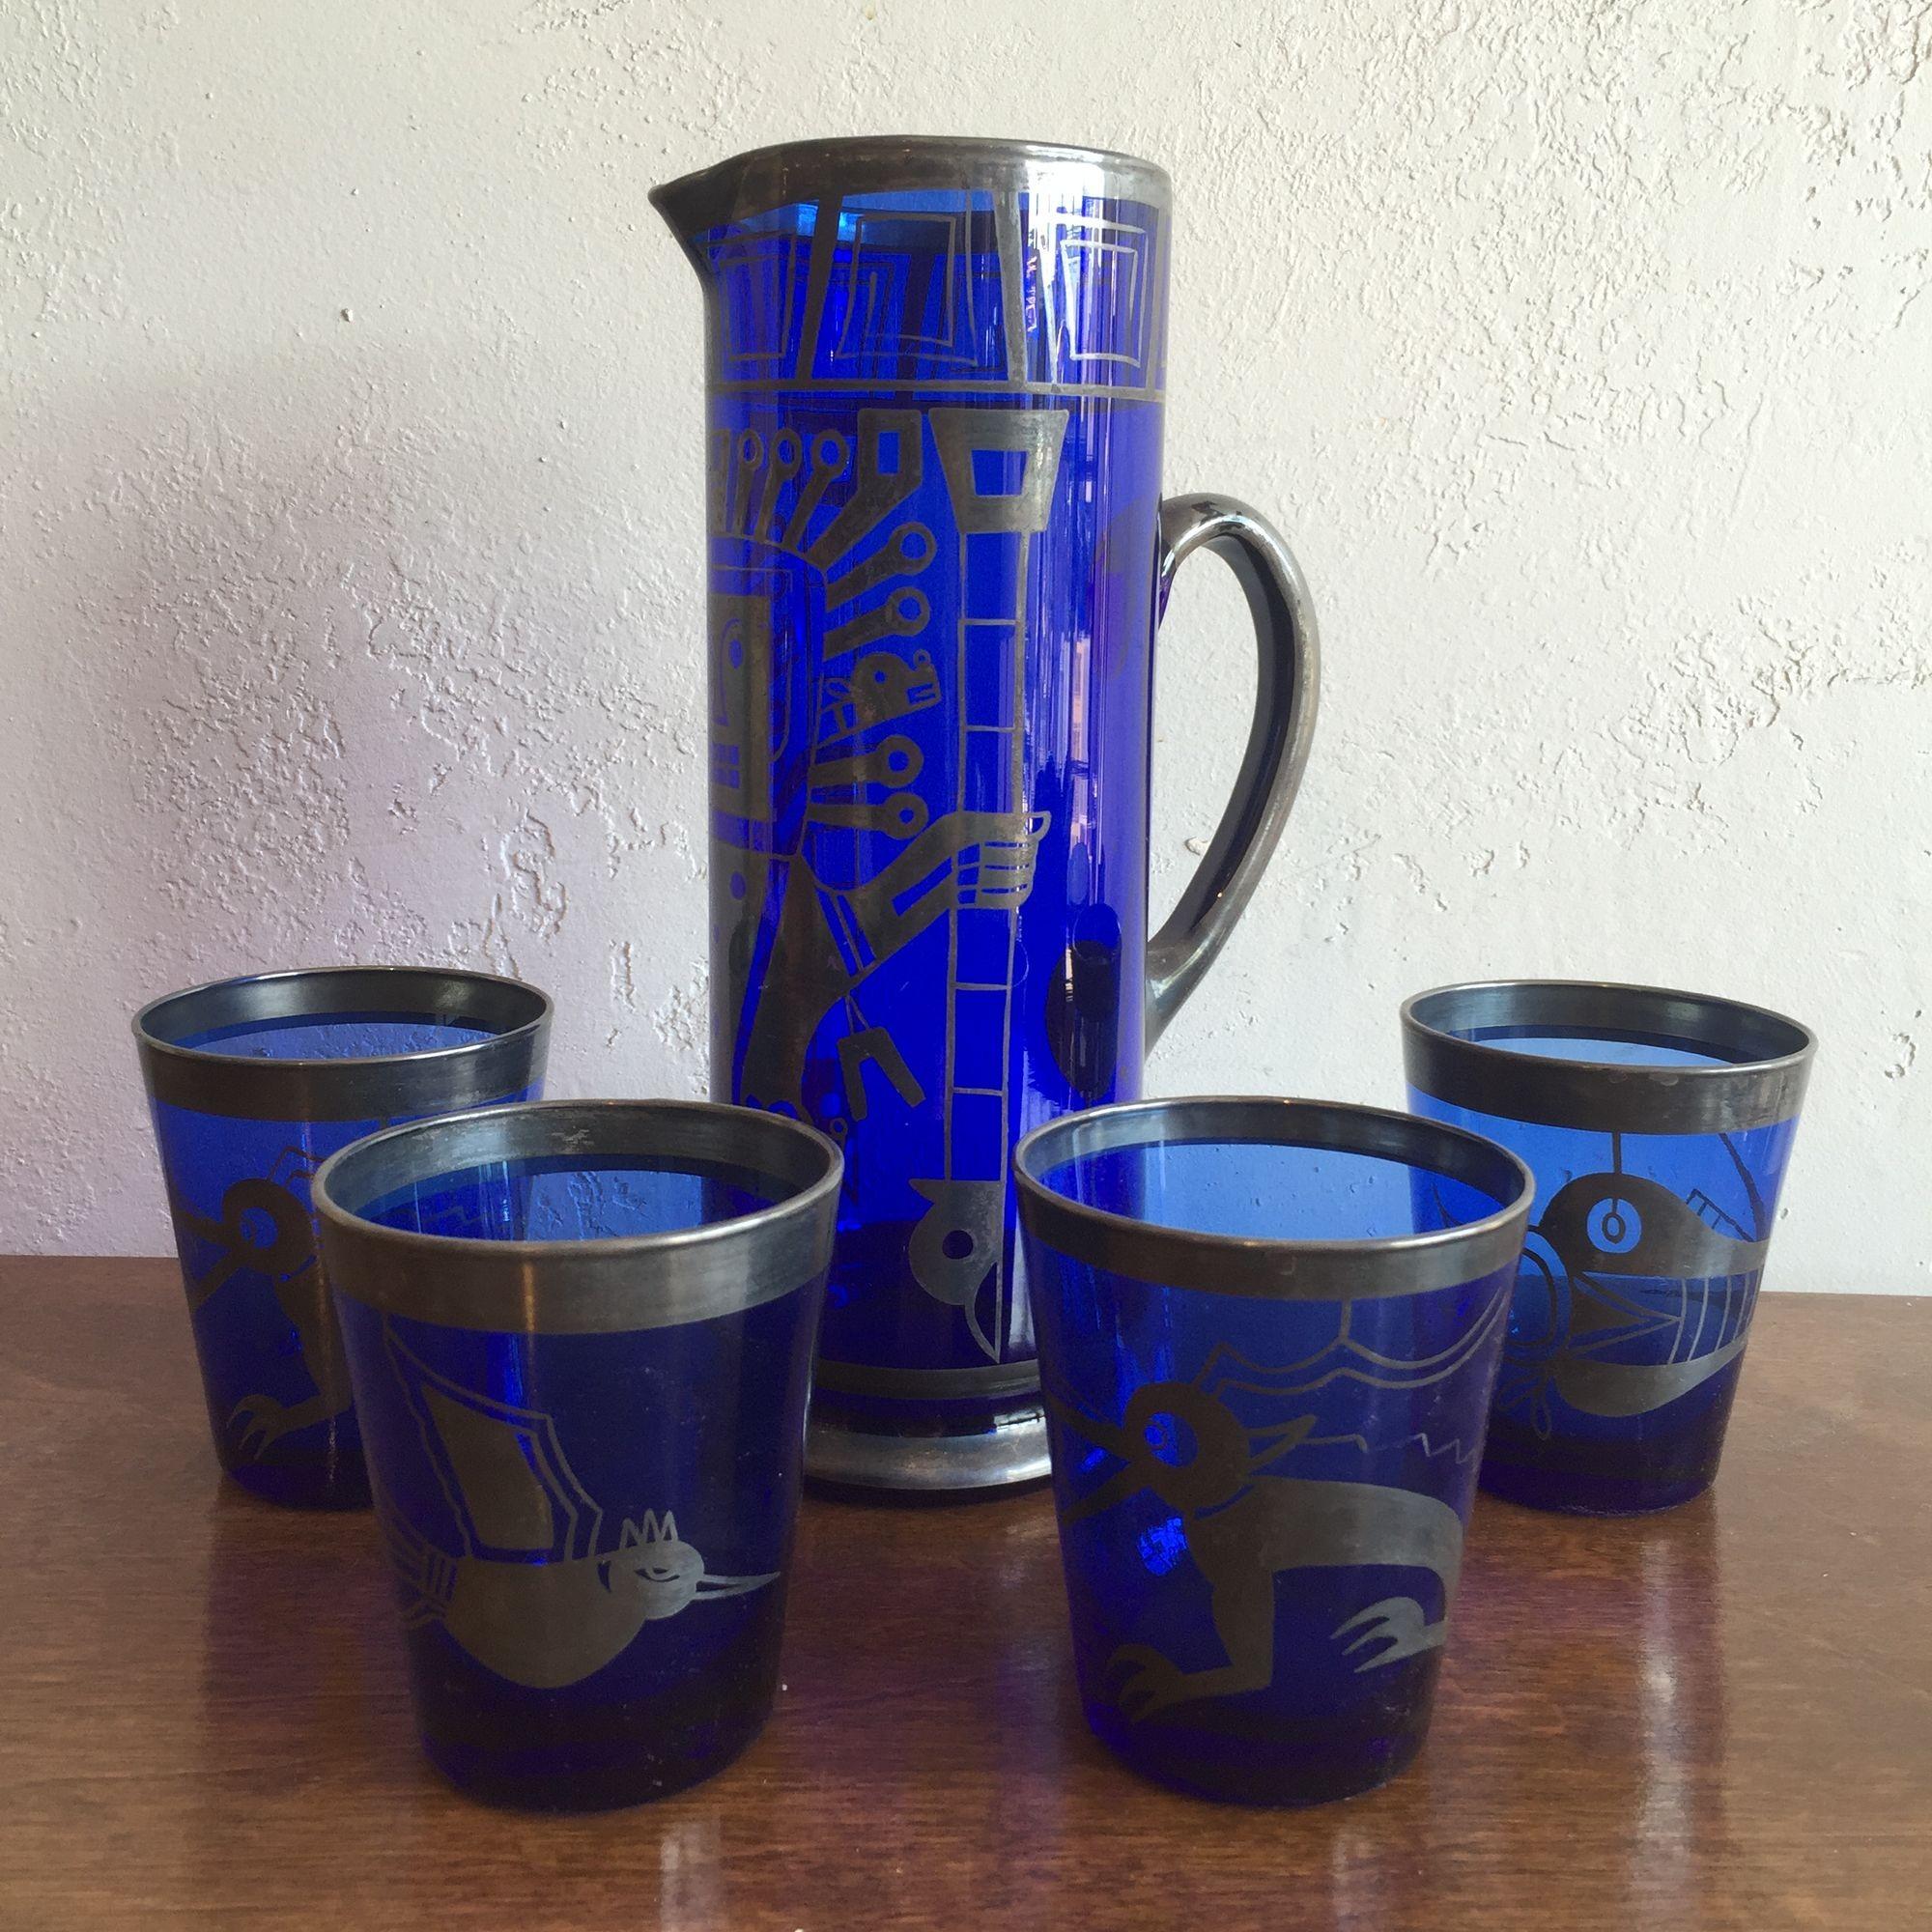 Unique ice tea, cocktail mixer set in cobalt blue glass with a silver Aztec design motif. The images appear to be hand painted in a sterling silver patina raku glaze.

Each glass has a different Mayan god or sprit creature.

In mint vintage